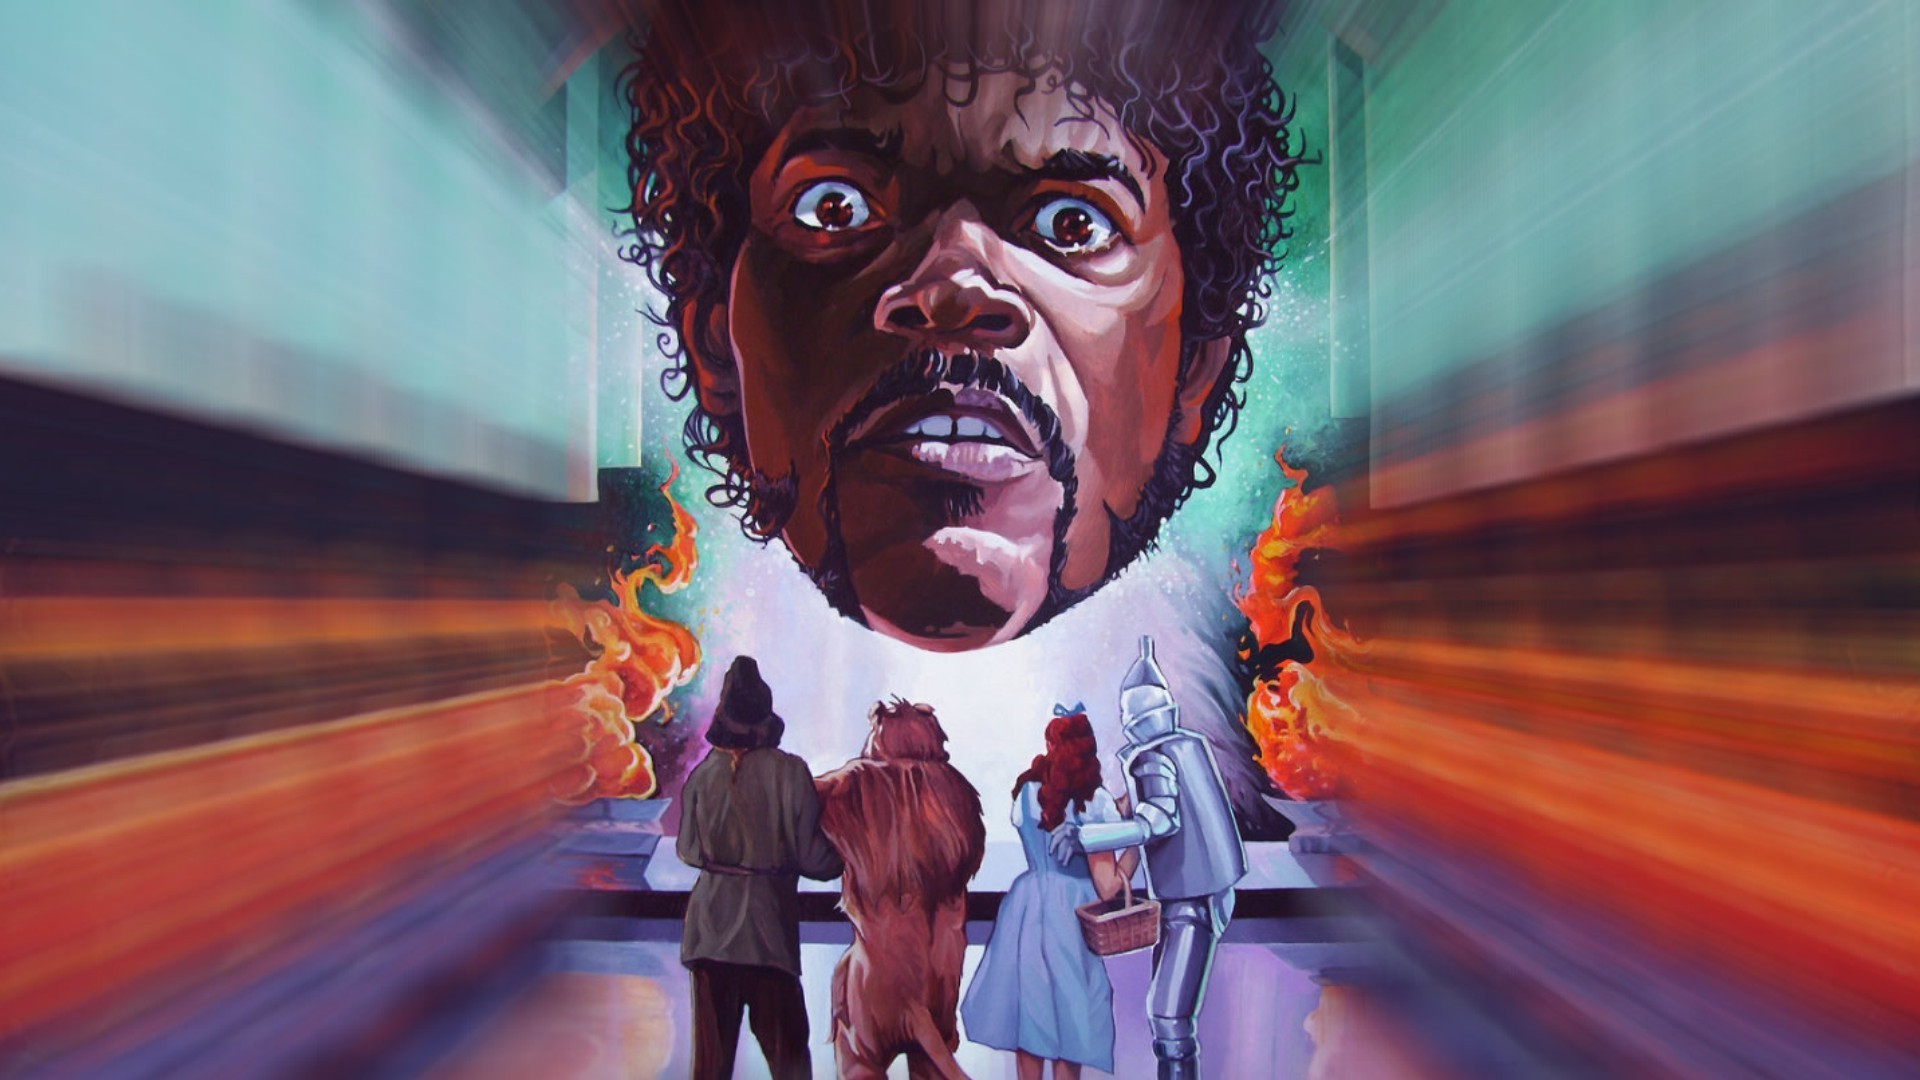 1920x1080 Wallpaper : px, artwork, crossover, movies, Pulp Fiction, Samuel L Jackson, The Wizard of Oz 4kWallpaper 1036110 HD Wallpapers